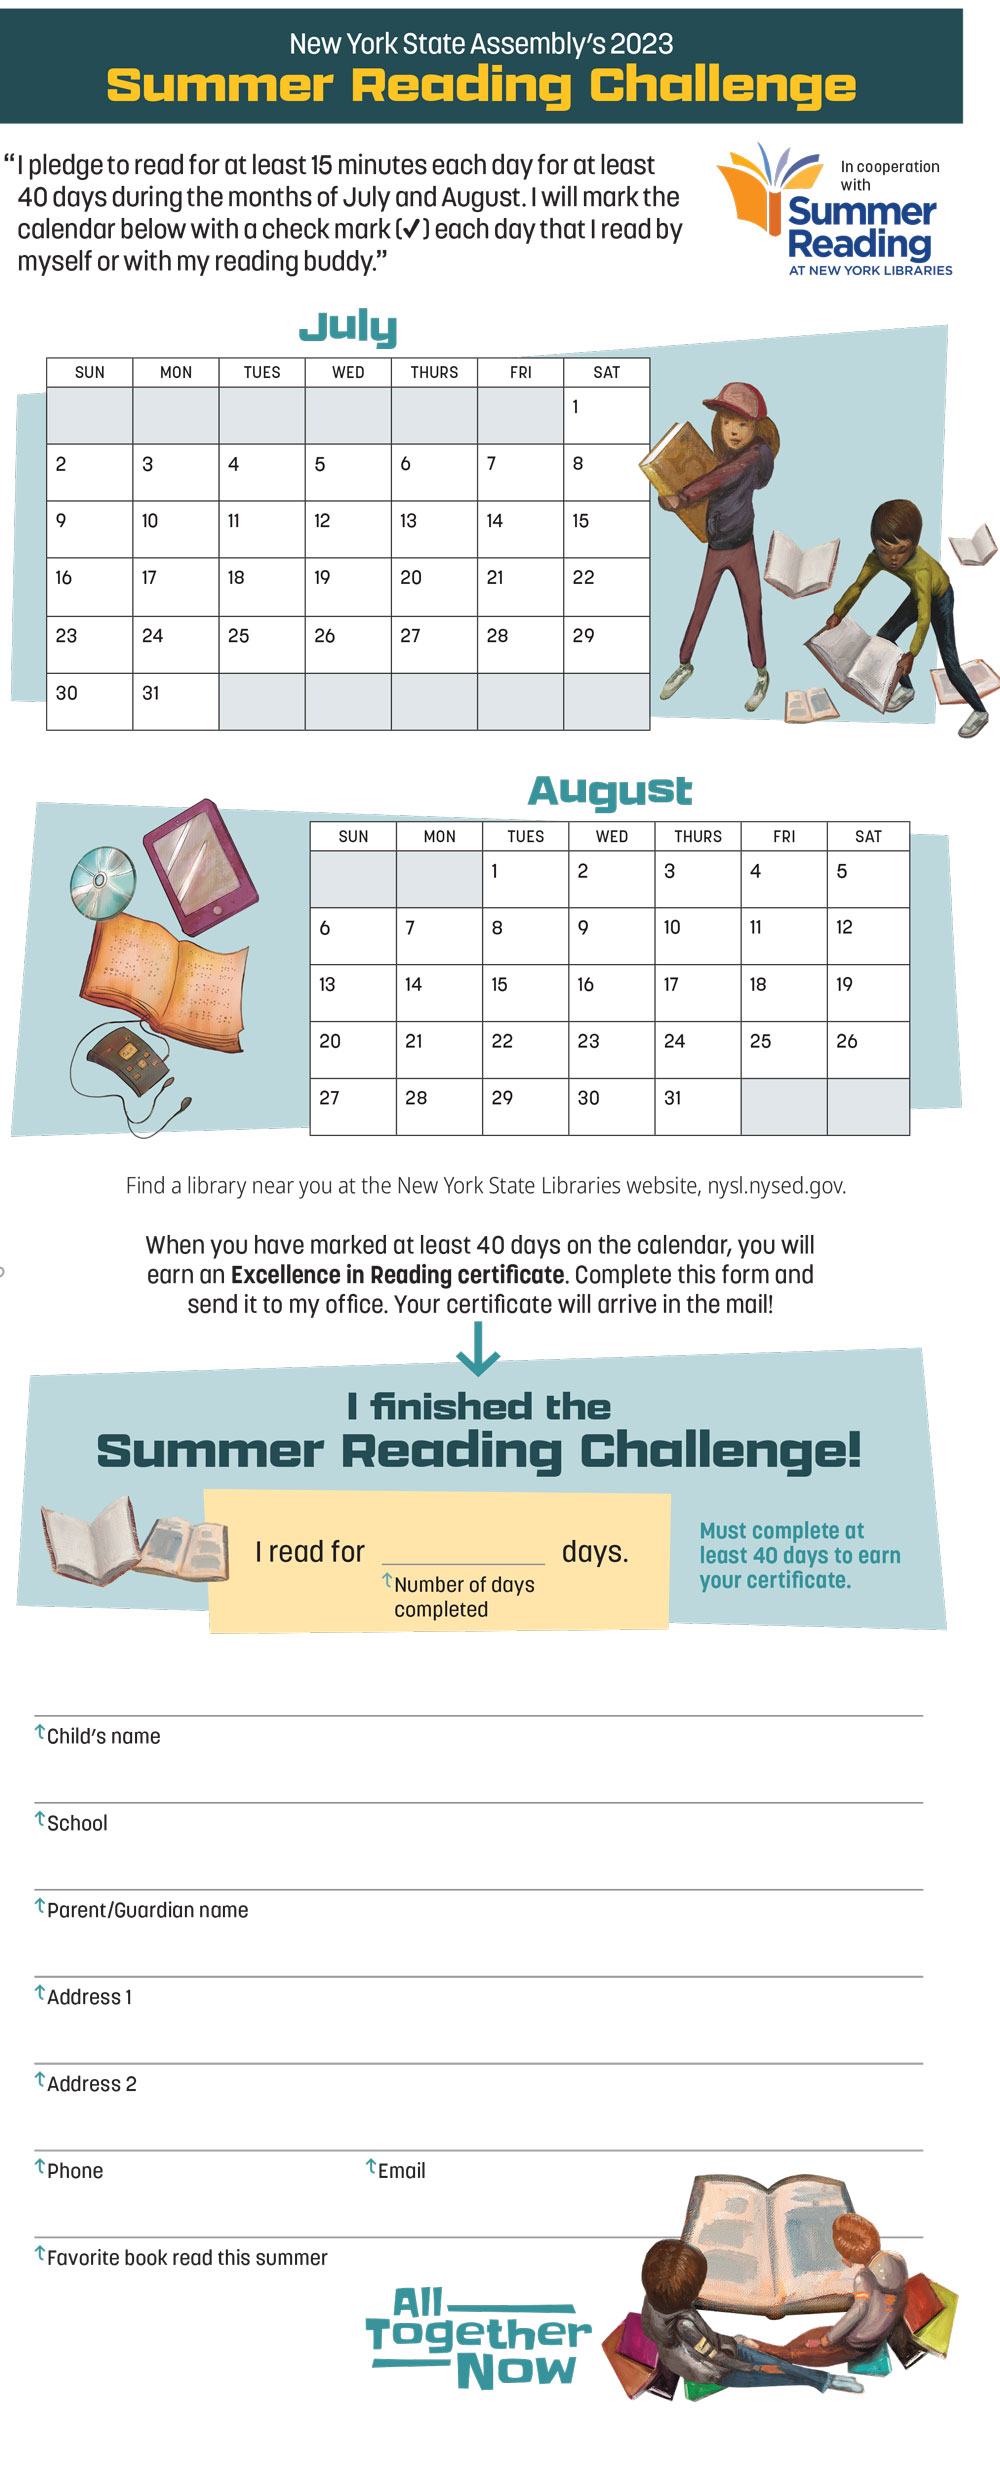 NYS Assembly's 2023 Summer Reading Challenge Calendar